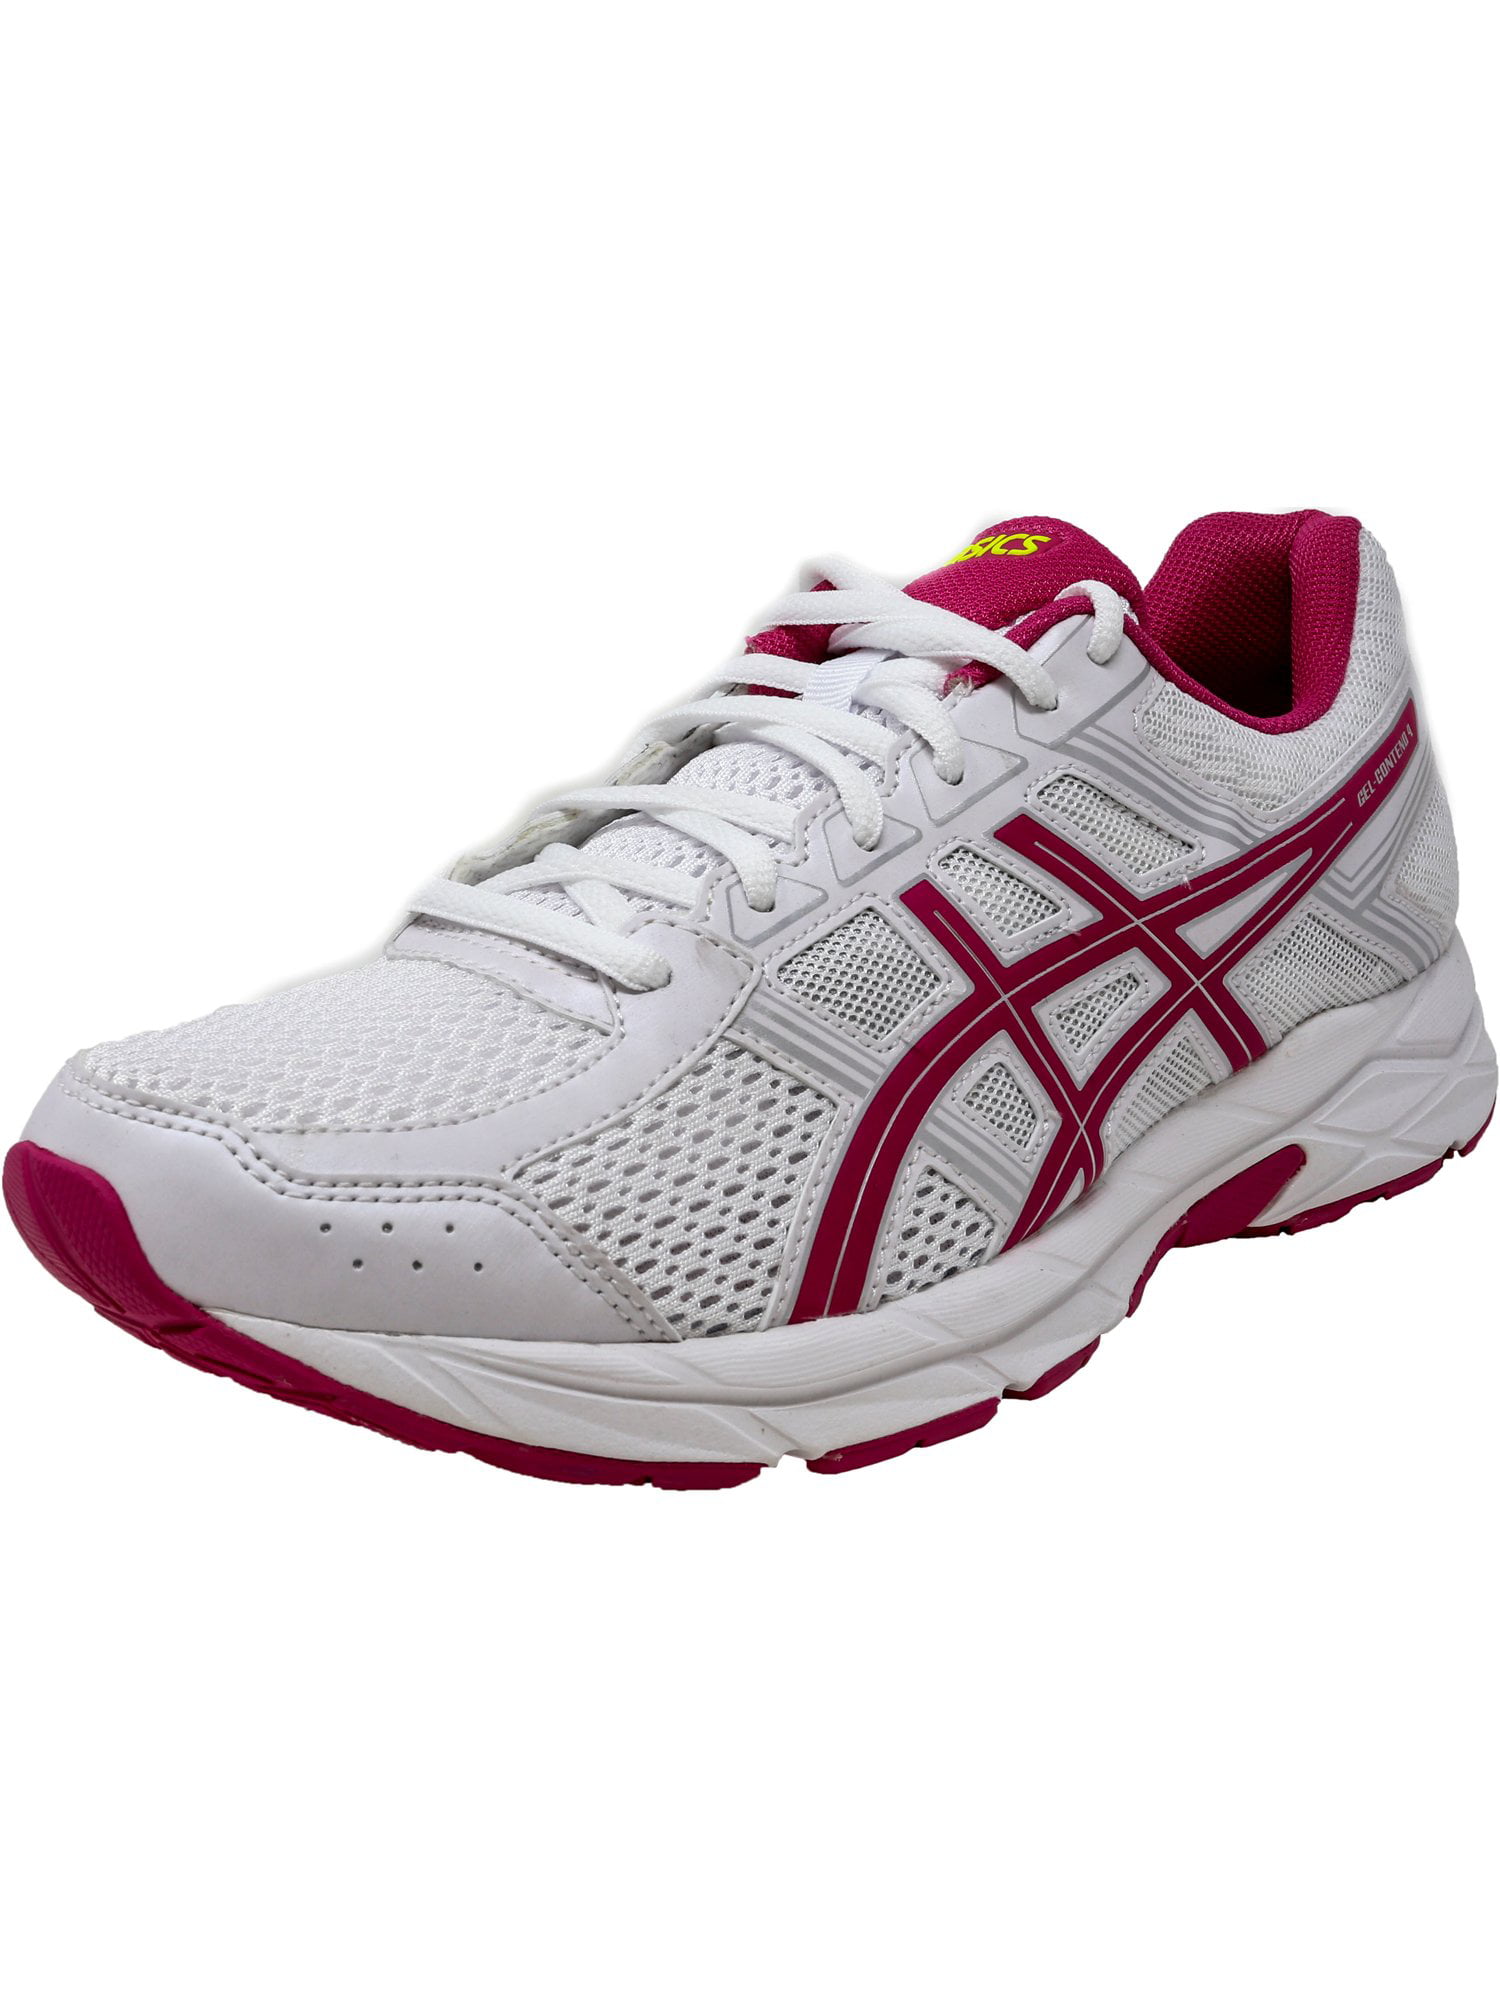 Asics Women's Gel-Contend 4 White / Pink Peacock Silver Ankle-High Running  Shoe  